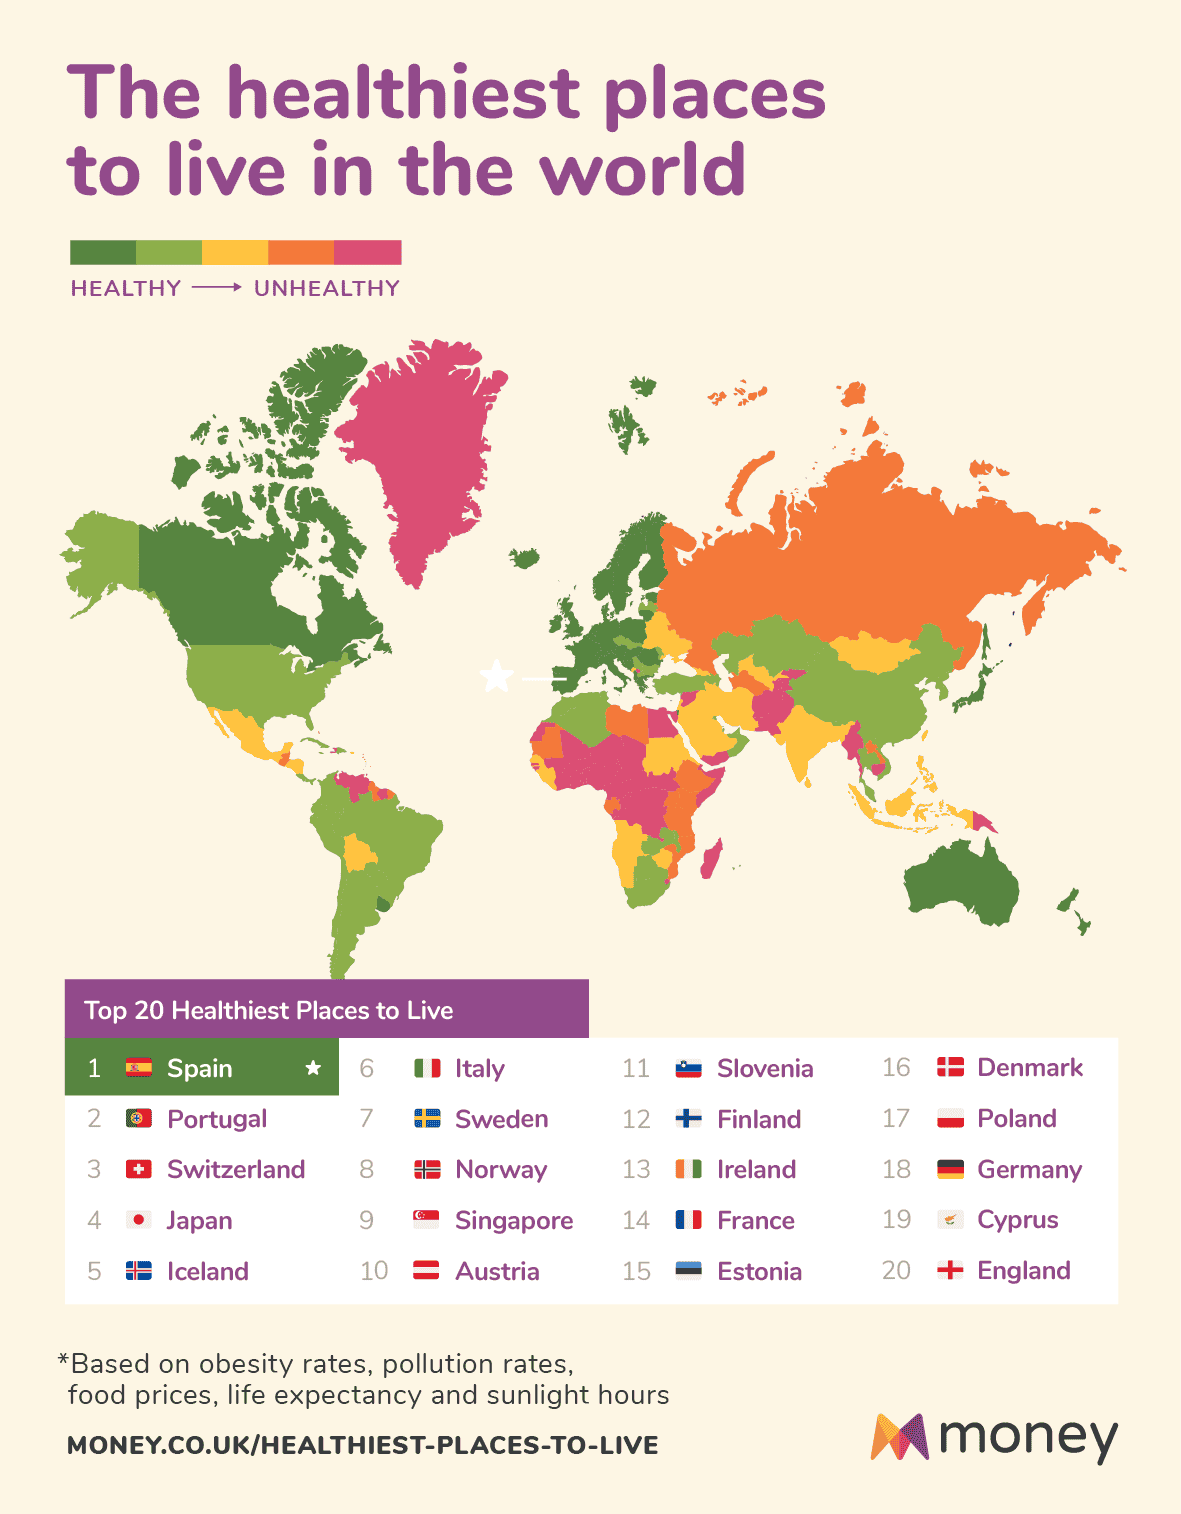 The healthiest places
to live in the world

HEALTHY — UNHEALTHY

  

Top 20 Healthiest Places to Live

  
    

       

JRL ESET) 10 Italy 11 «=m Slovenia 16 = Denmark
B38 Portugal / ~~ &= Sweden 12 4 Finland / =m Poland
£3 Switzerland 8 #8 Norway 13 00 Ireland 18 ®8® Germany
® Japan 9 “=m Singapore 14 00 France 19 « Cyprus

5 da Iceland 10 = Austria 15 && Estonia 20 += England

*Based on obesity rates, pollution rates,
food prices, life expectancy and sunlight hours

MONEY.CO.UK/HEALTHIEST-PLACES-TO-LIVE JAMon ey